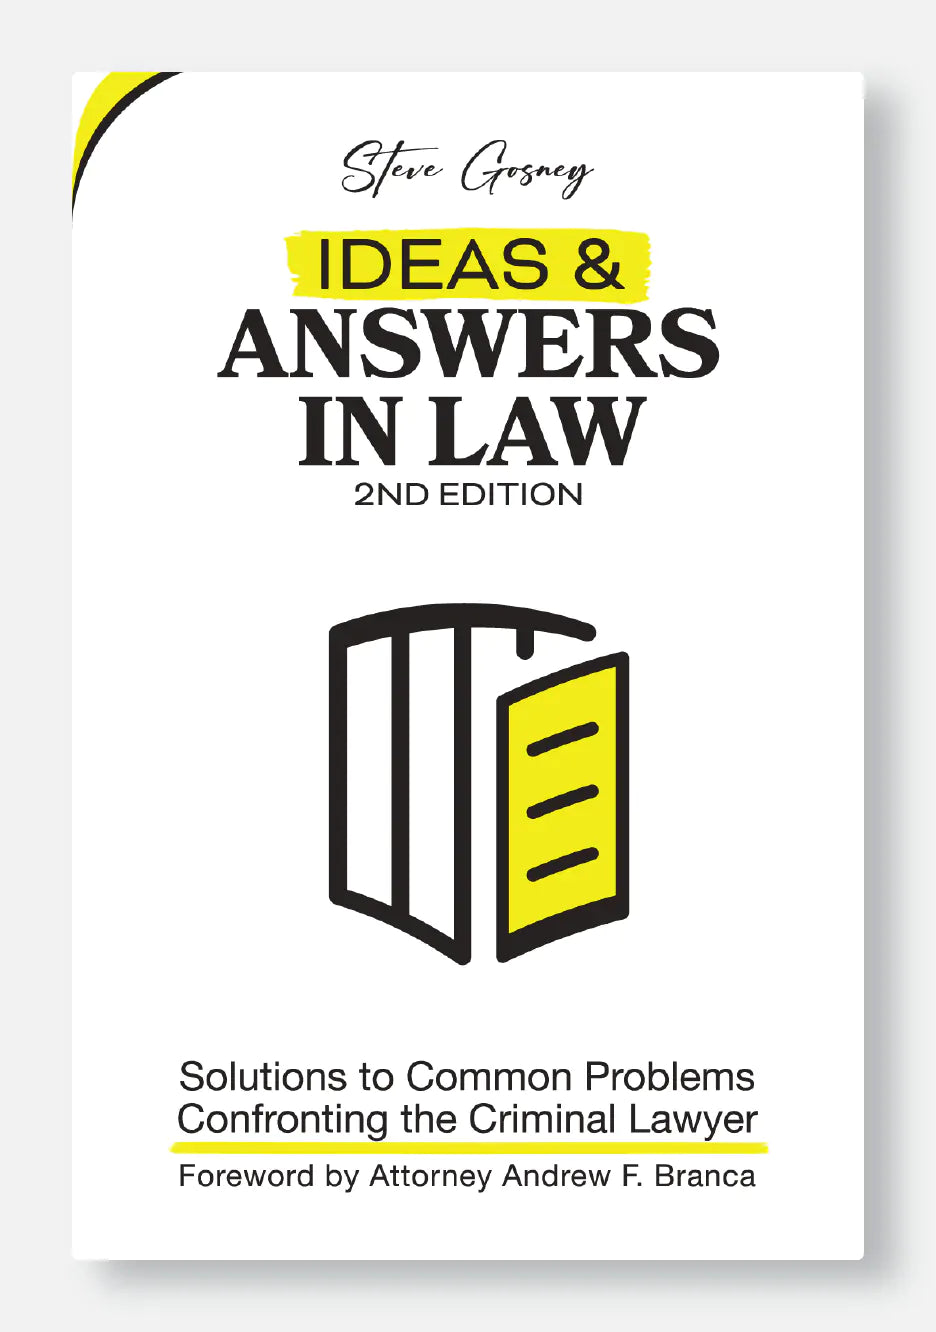 Ideas & Answers in Law book (autographed)